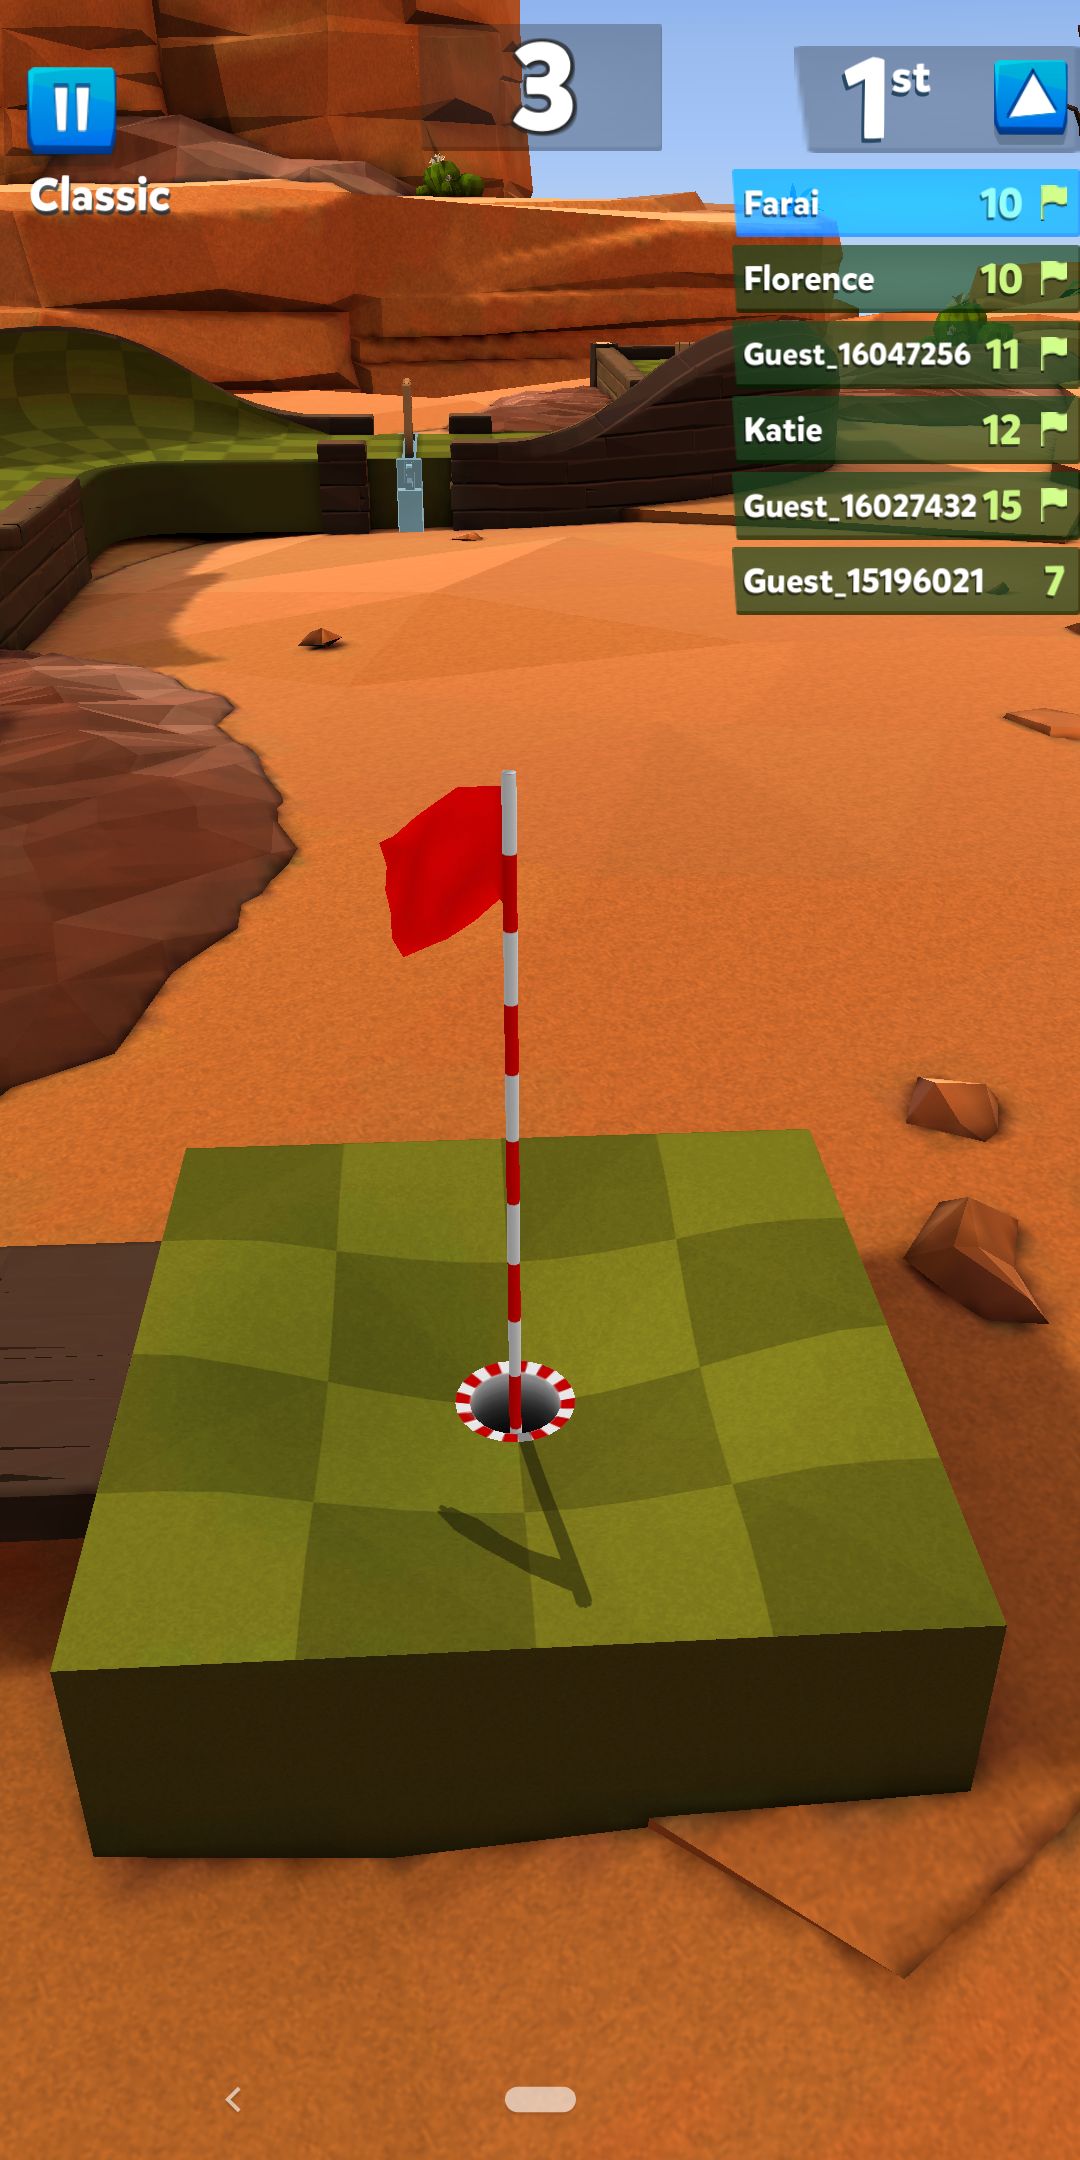 Review: Golf Battle Is An Insanely Addictive Online Mobile Multiplayer Game  - Techzim